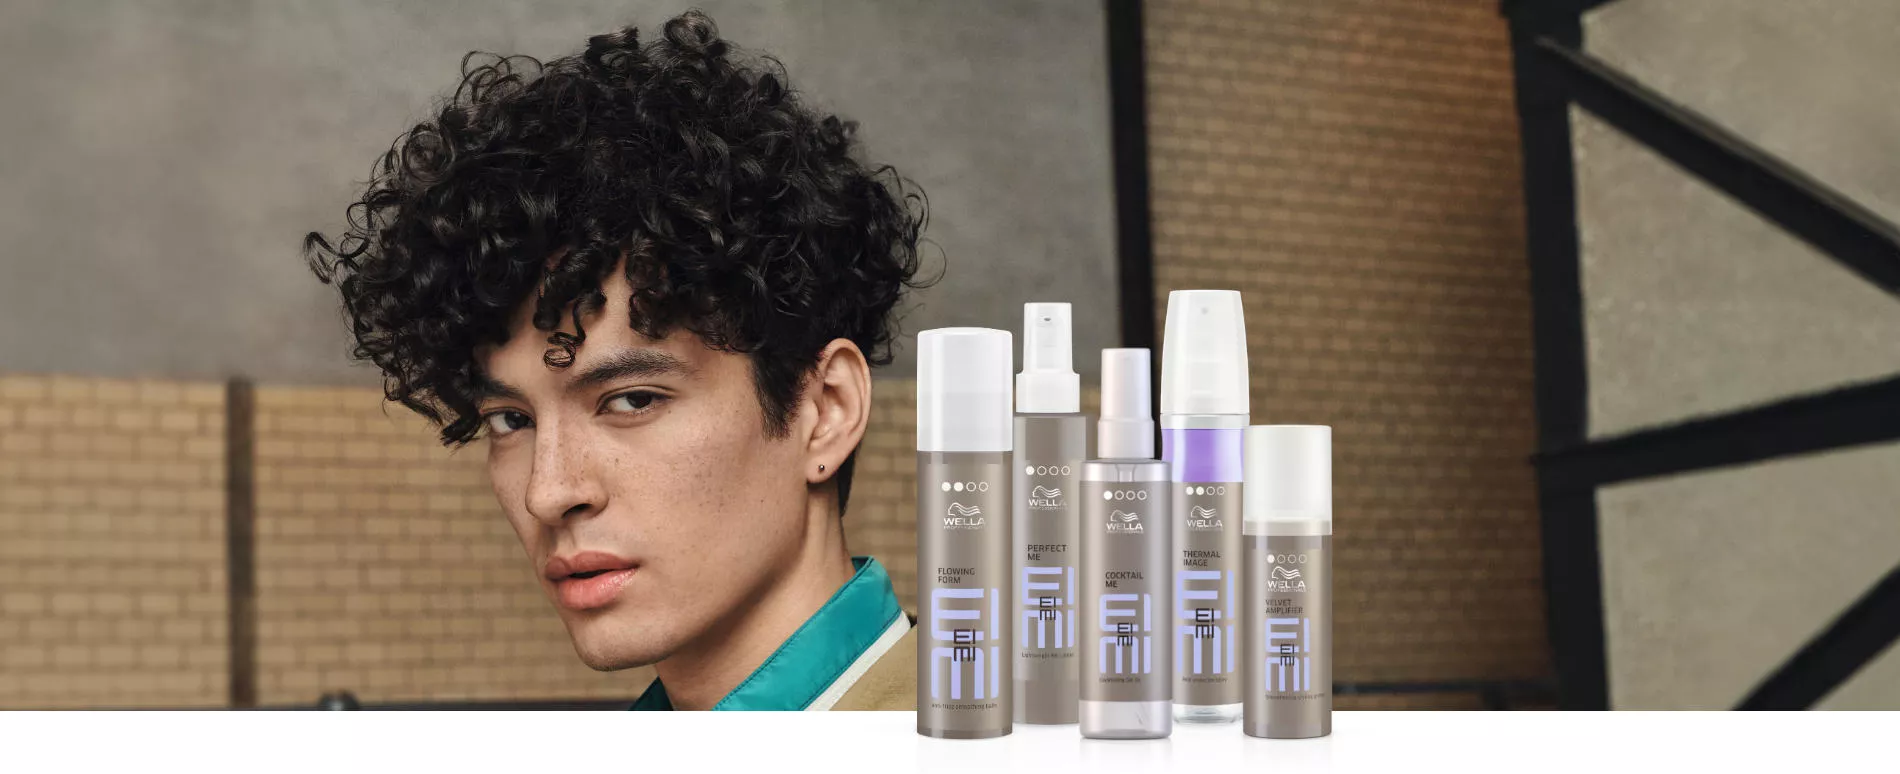 Headshot of a male model with forehead-length very thick, tightly curled black hair, plus 5 bottles of EIMI styling product